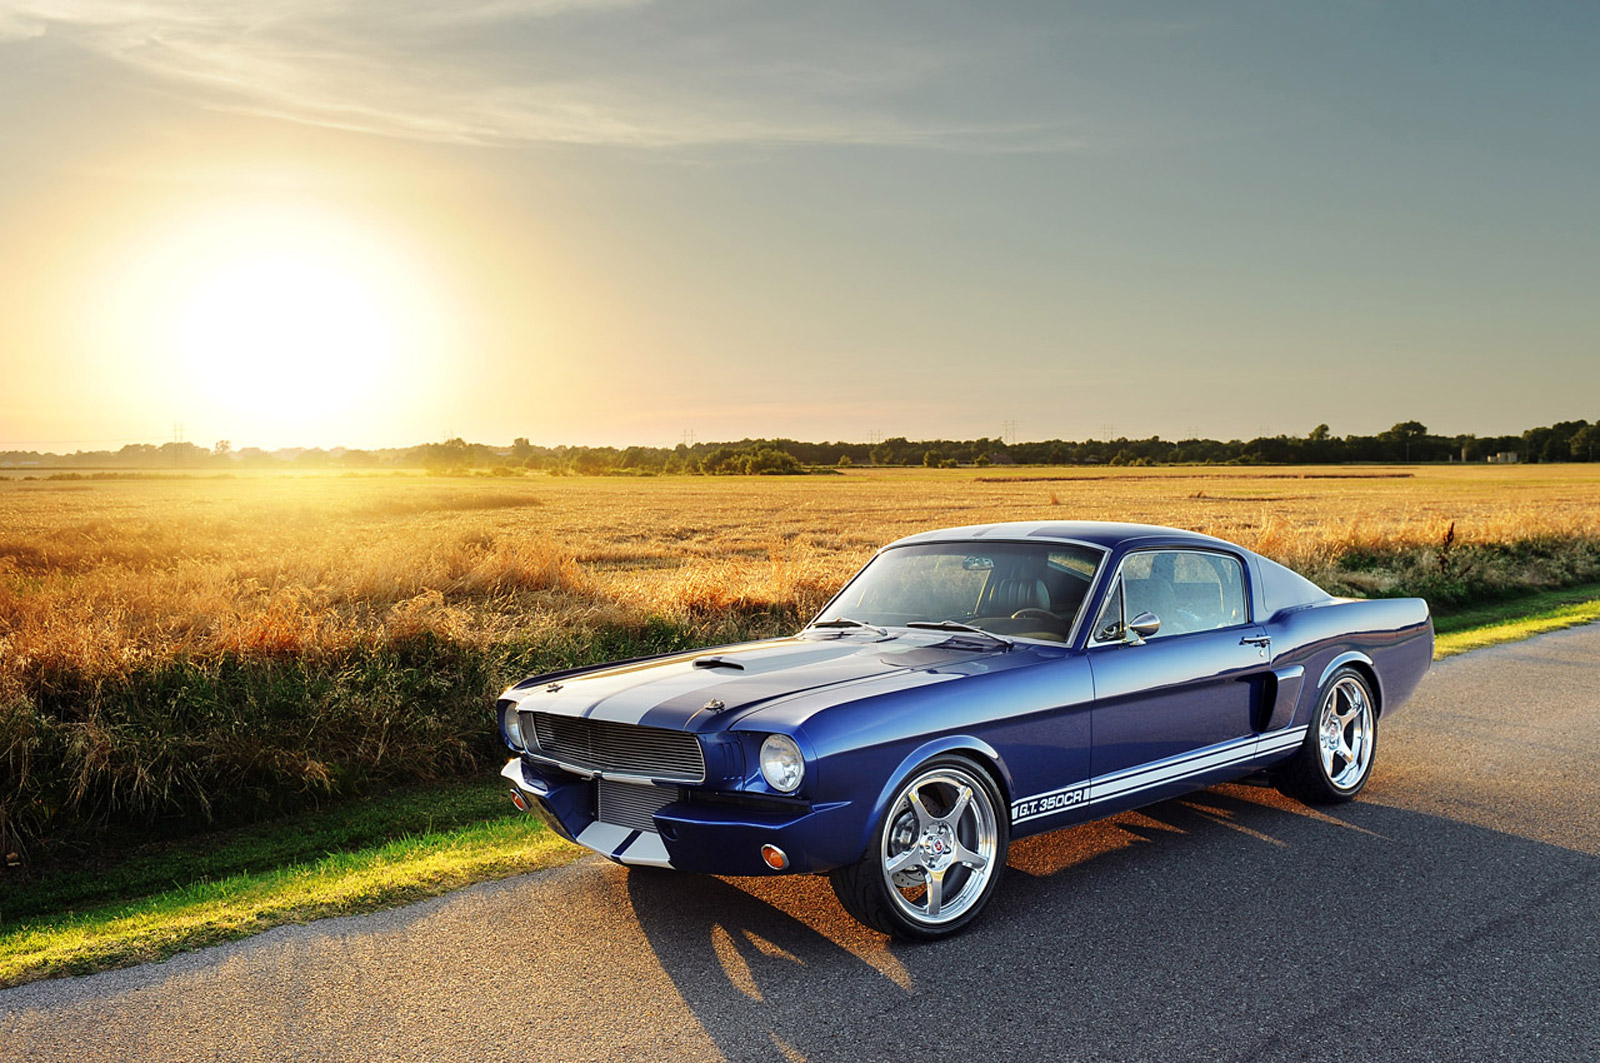 Classic Recreations' 1966 Mustang Fastback Shelby GT350CR Is A Beauty